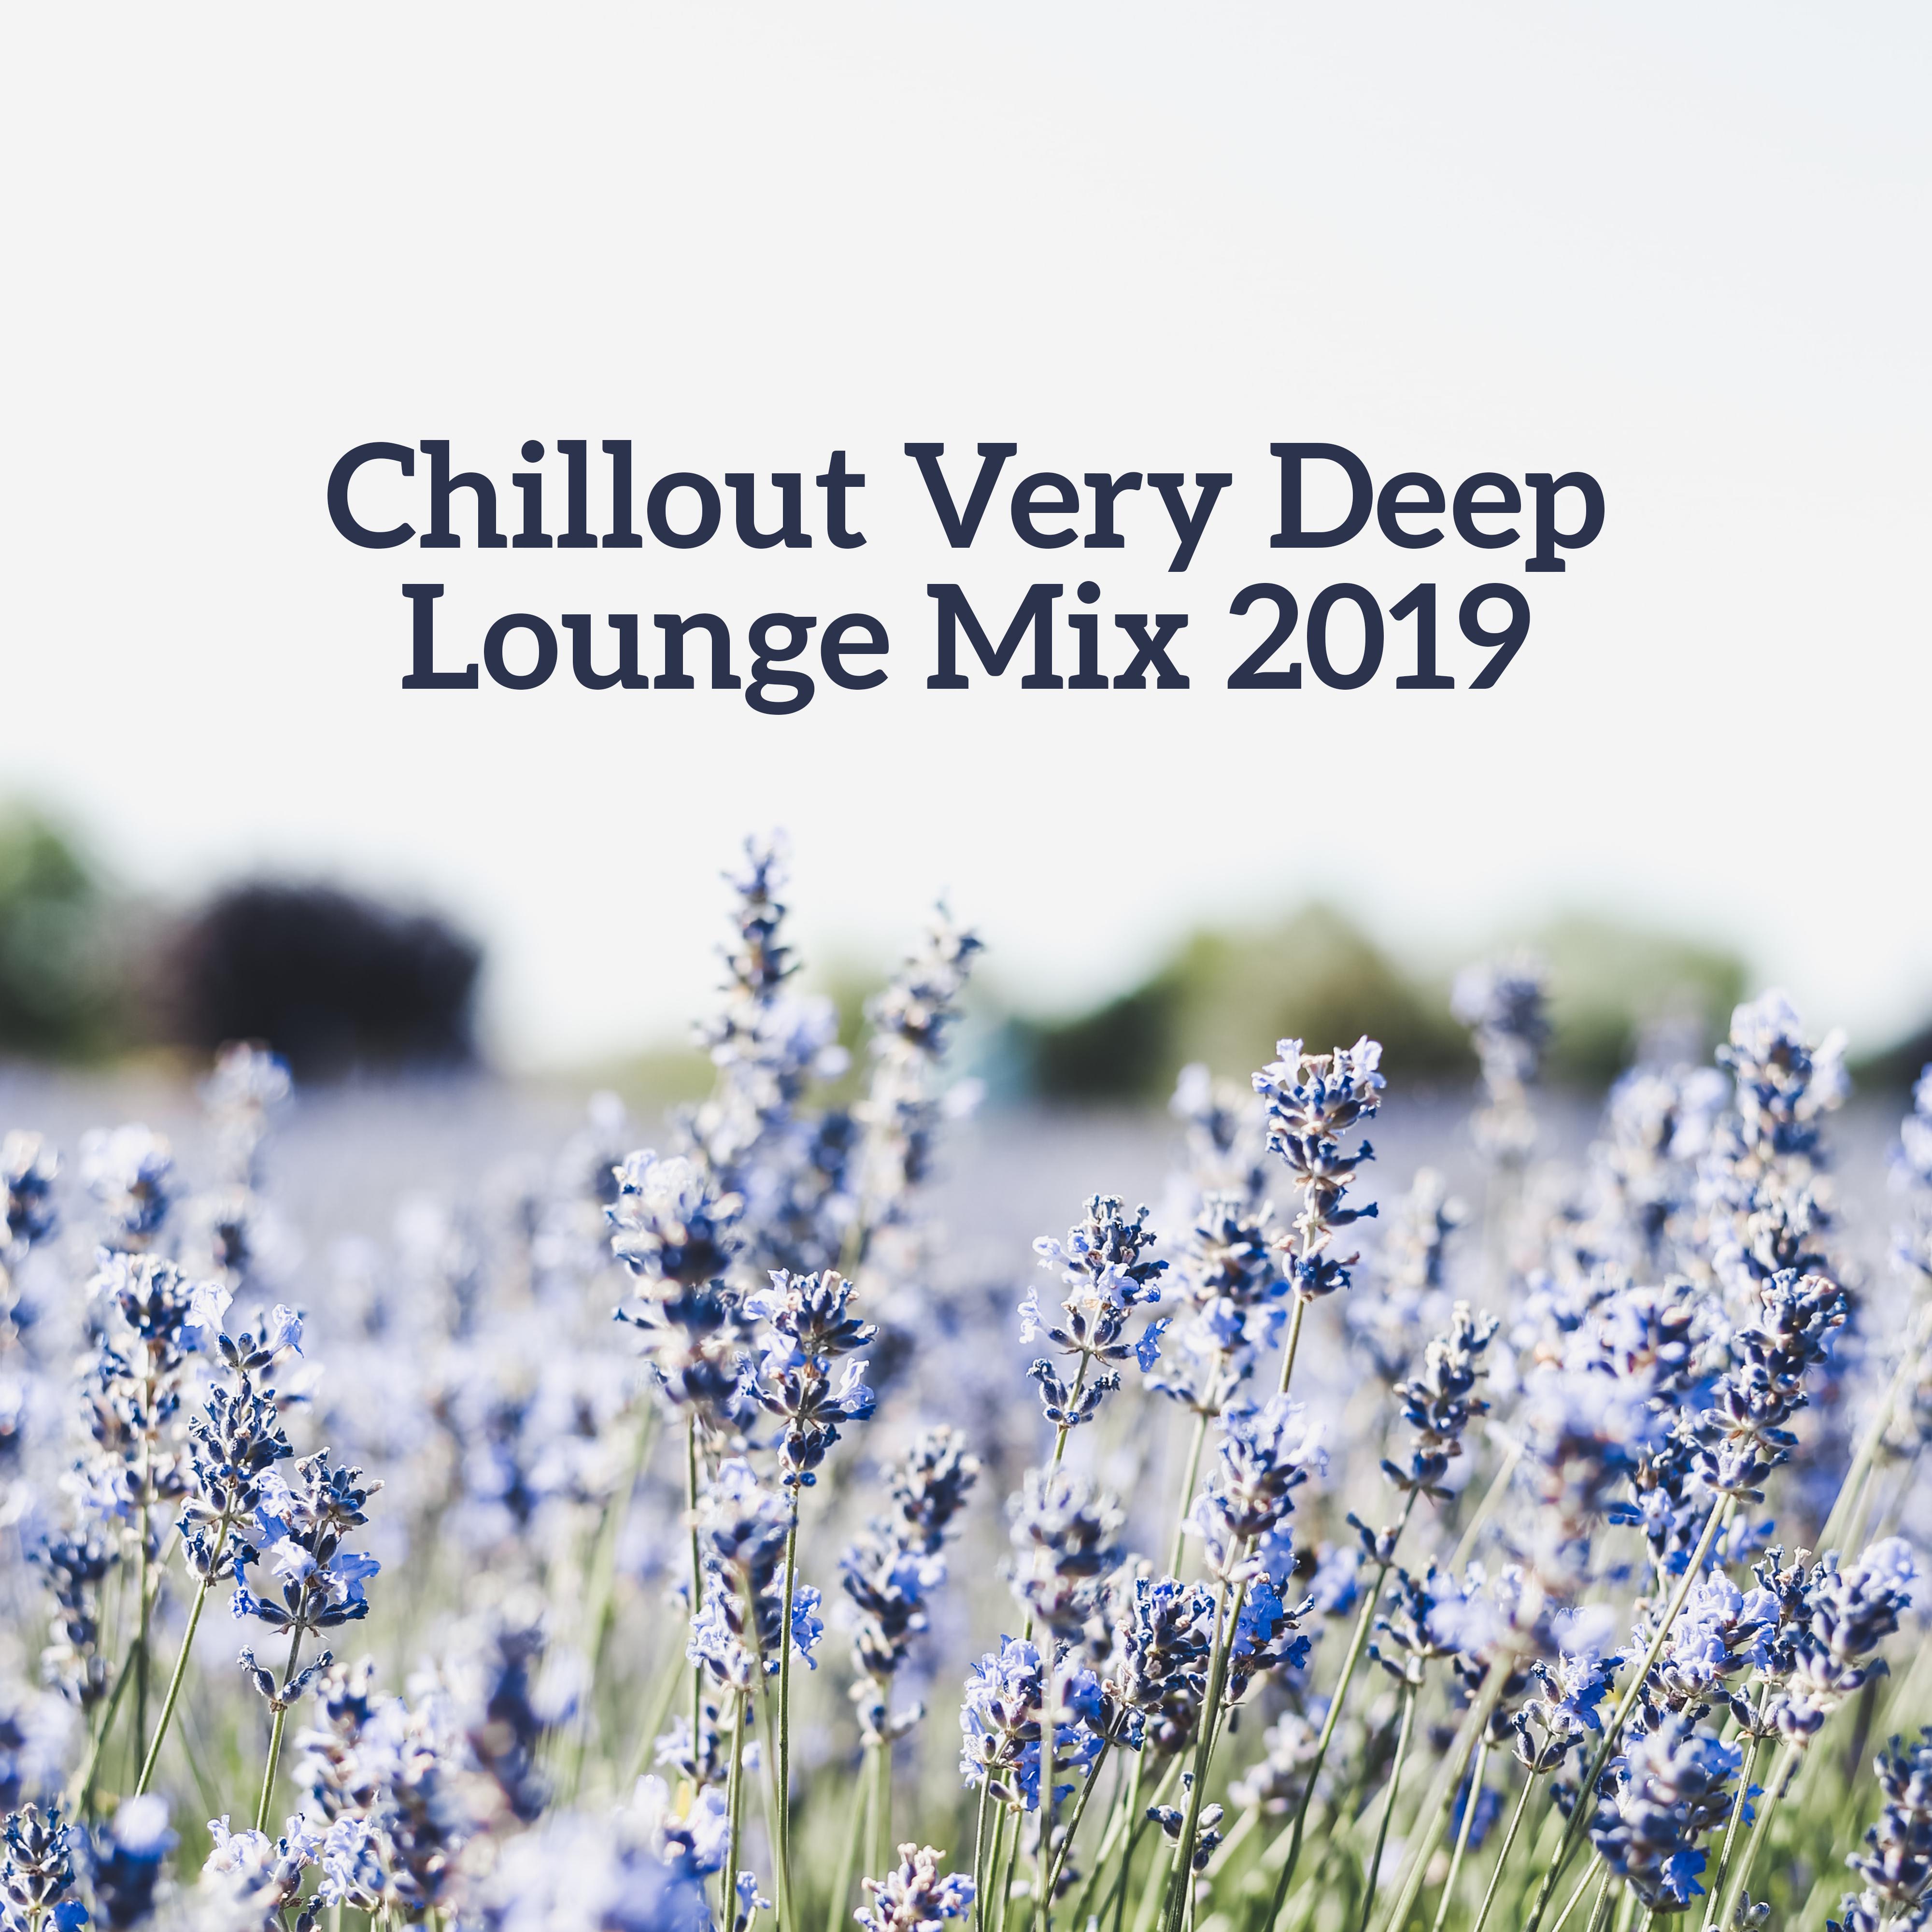 Chillout Very Deep Lounge Mix 2019 – Selection of Best Ambient Chill Out Music, Soft Melodies & Deep Beats, Moments of Total Calm, Relaxing Summer 2019